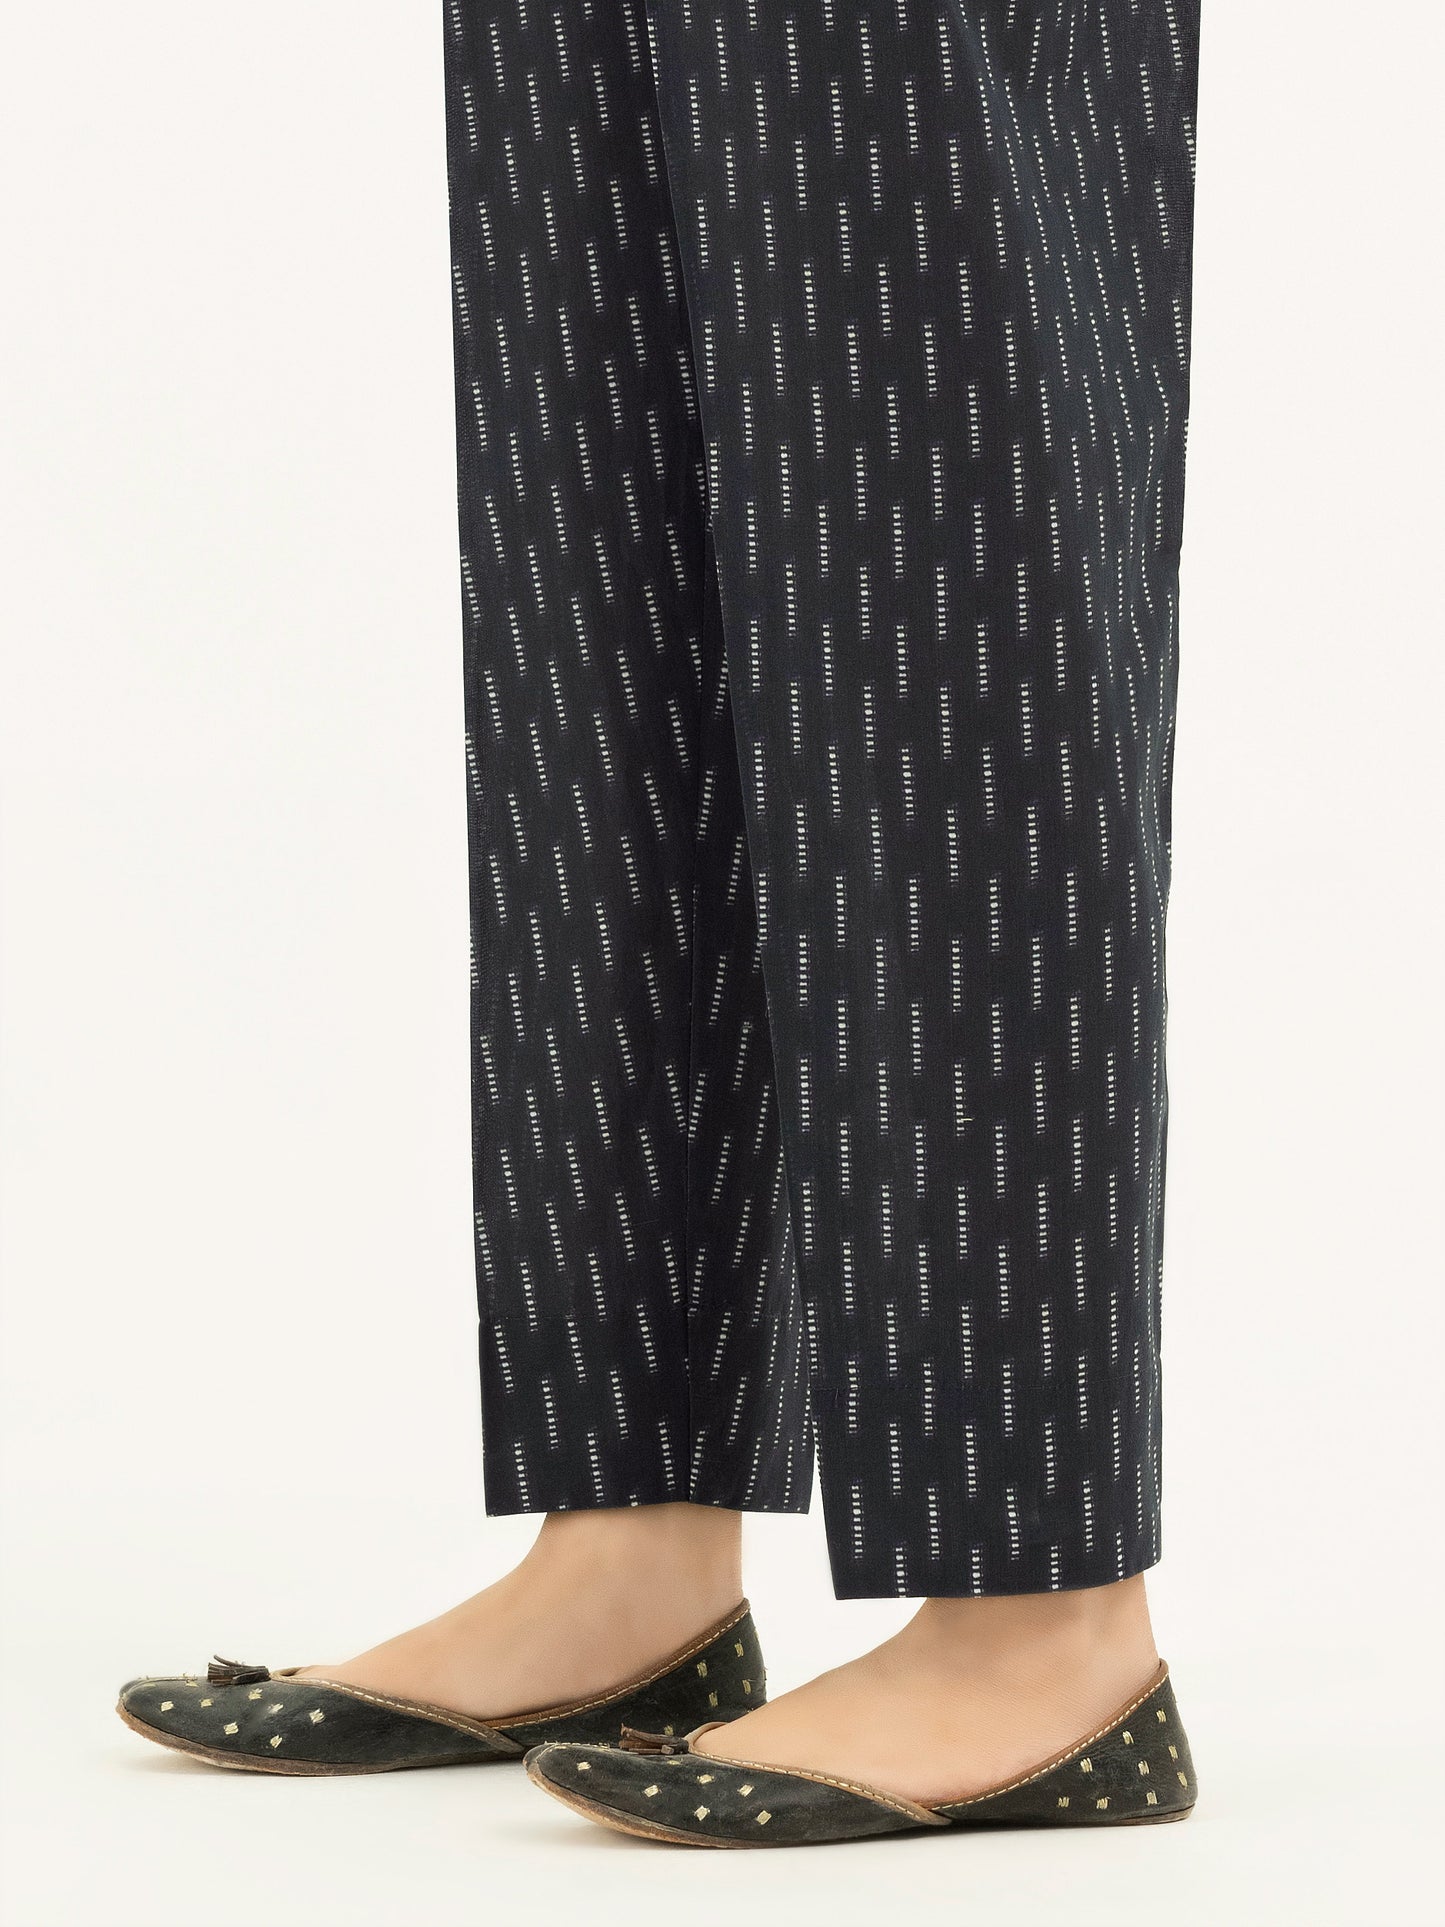 Printed Cambric Trousers